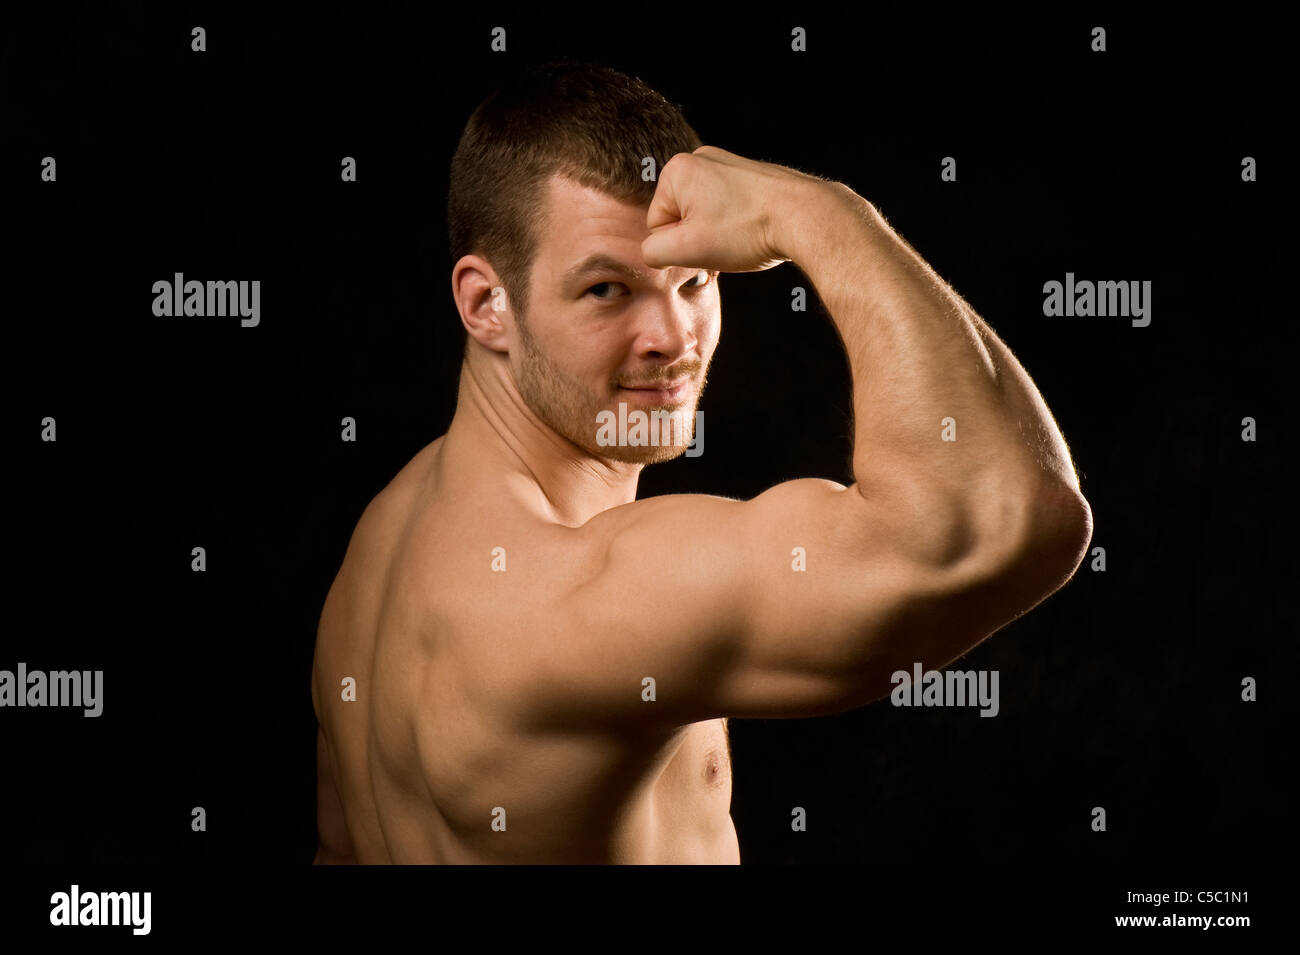 Close-up portrait of smiling macho man flexing muscles over black background Stock Photo